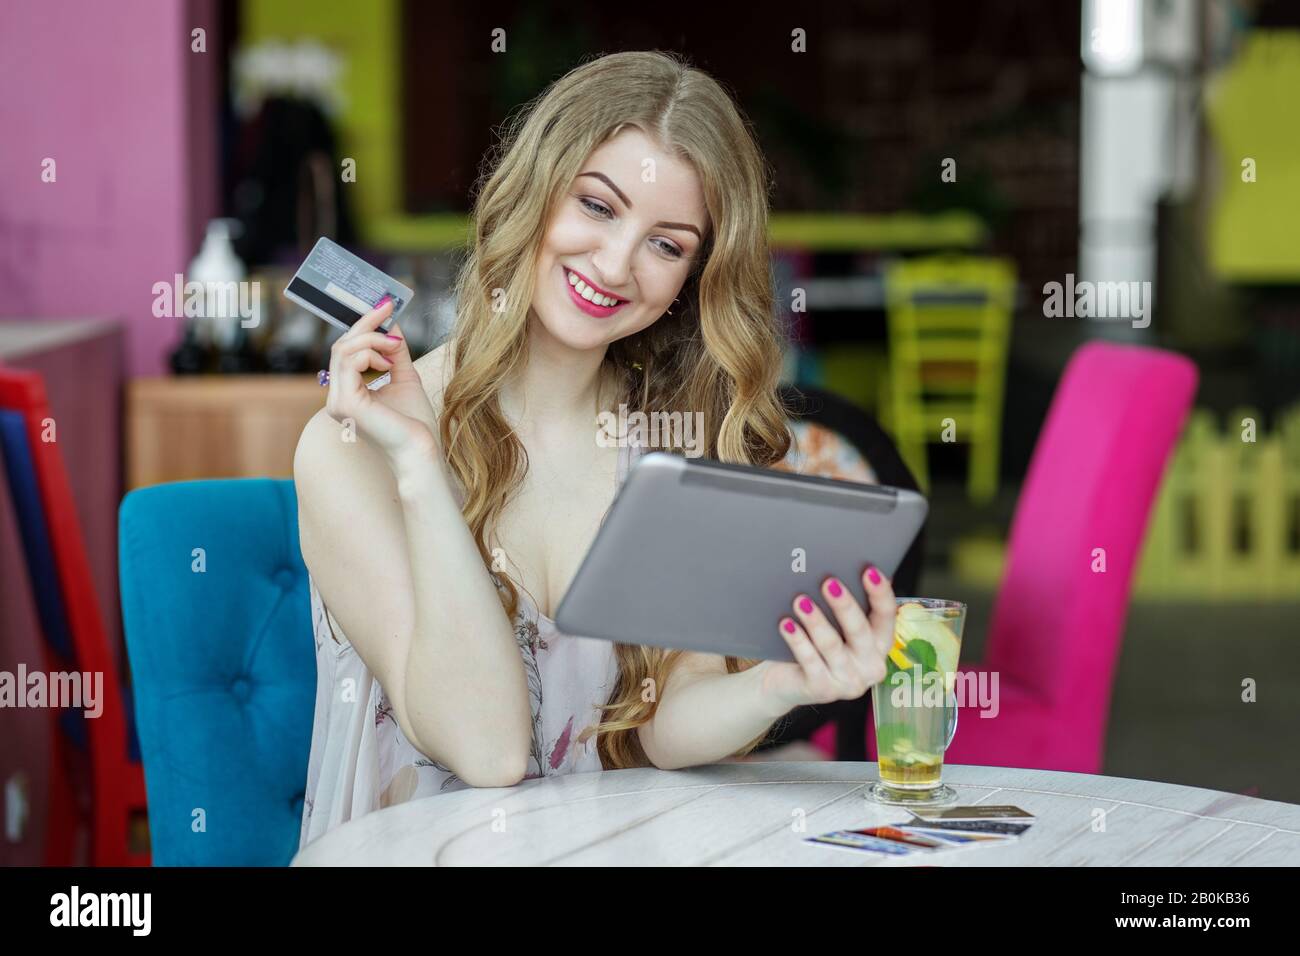 Adult smiling woman is shopping on the Internet. Big discounts. Credit card payment. Concept of e-commerce, online shopping, internet, technology and Stock Photo